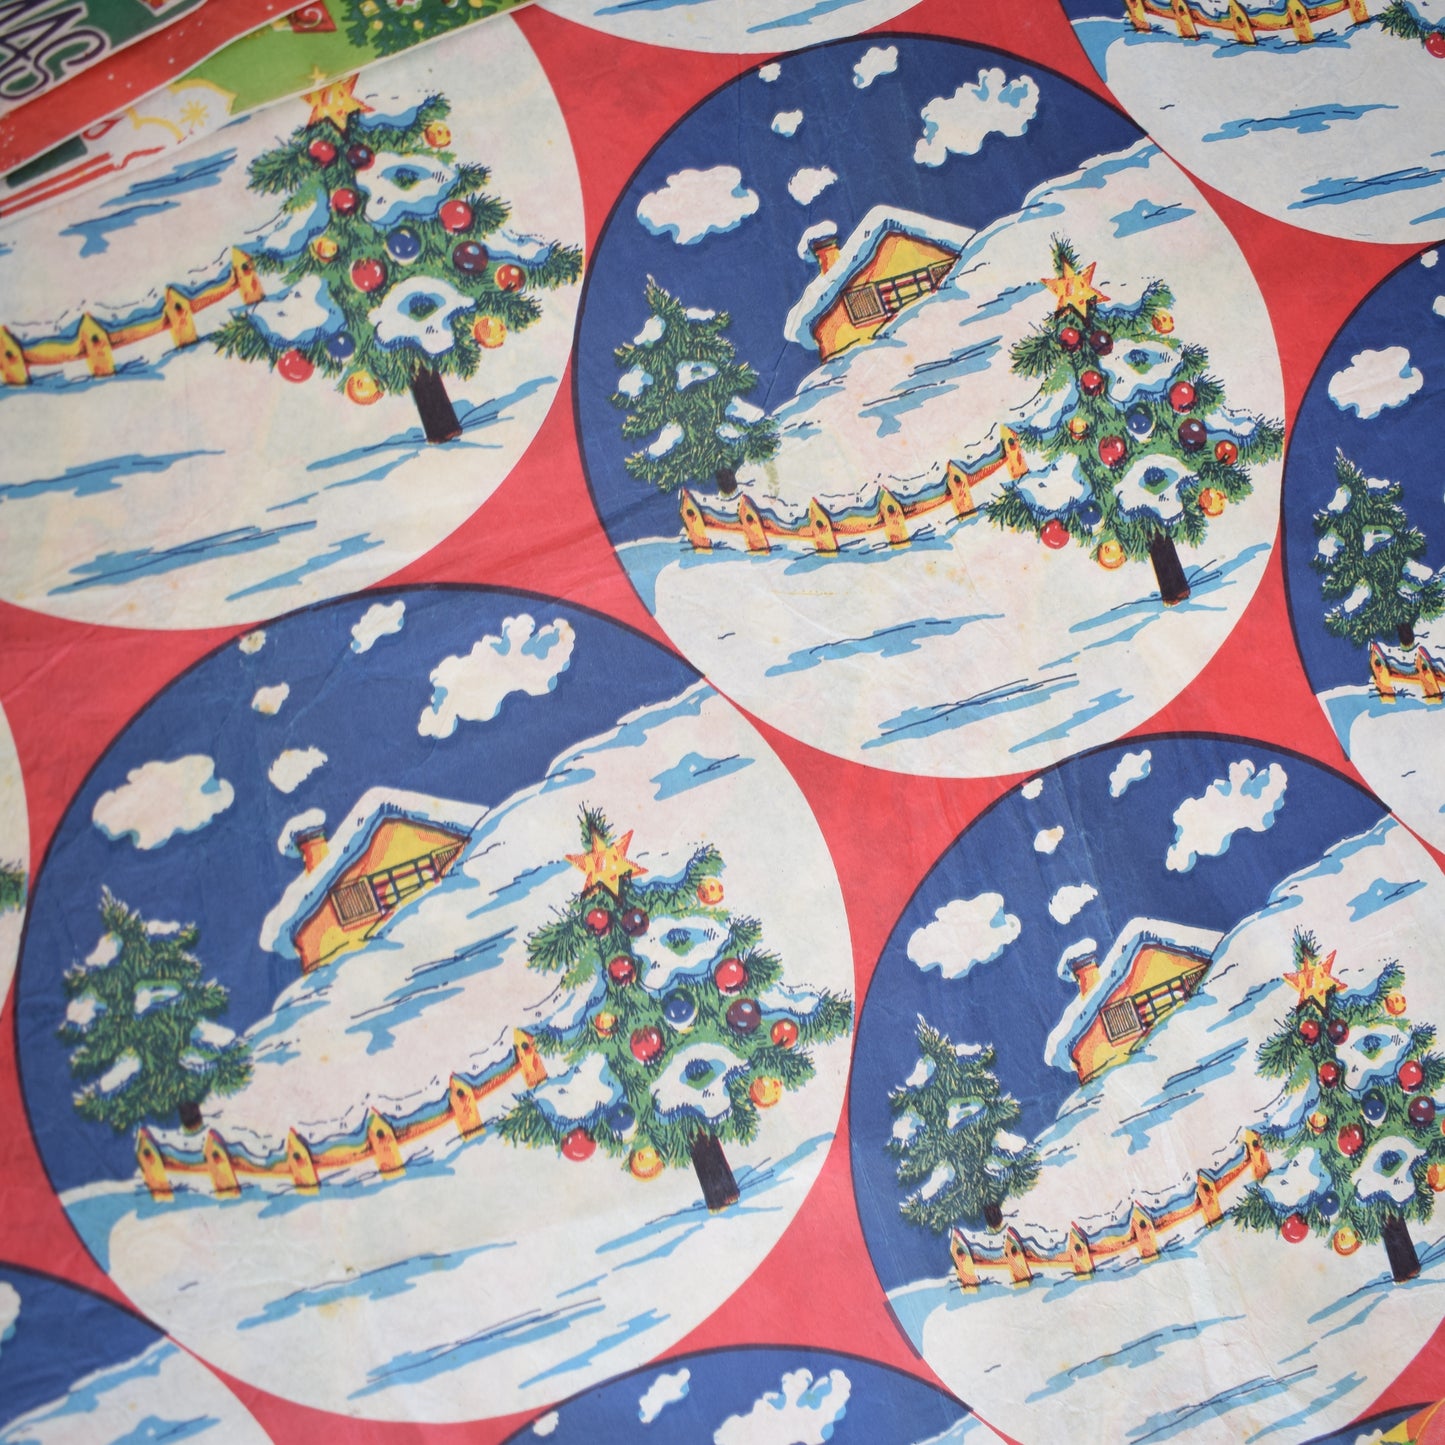 Vintage 1970s Christmas Gift Paper - Mixed Pack